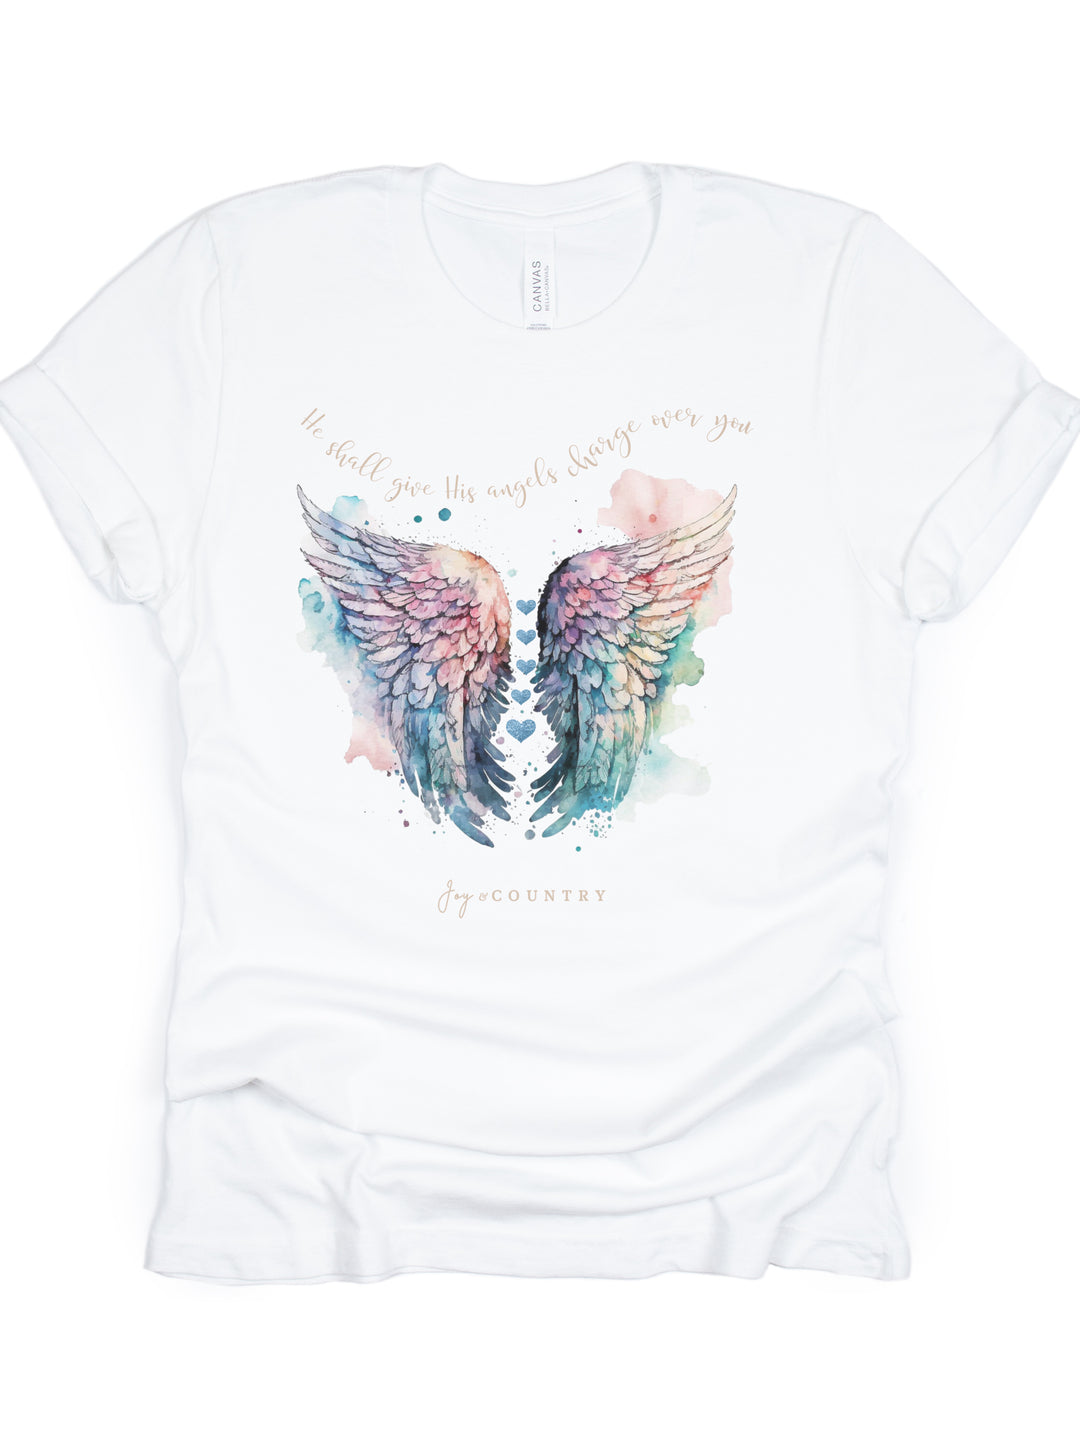 He Shall Give His Angels Charge Over You - Unisex Crew-Neck Tee